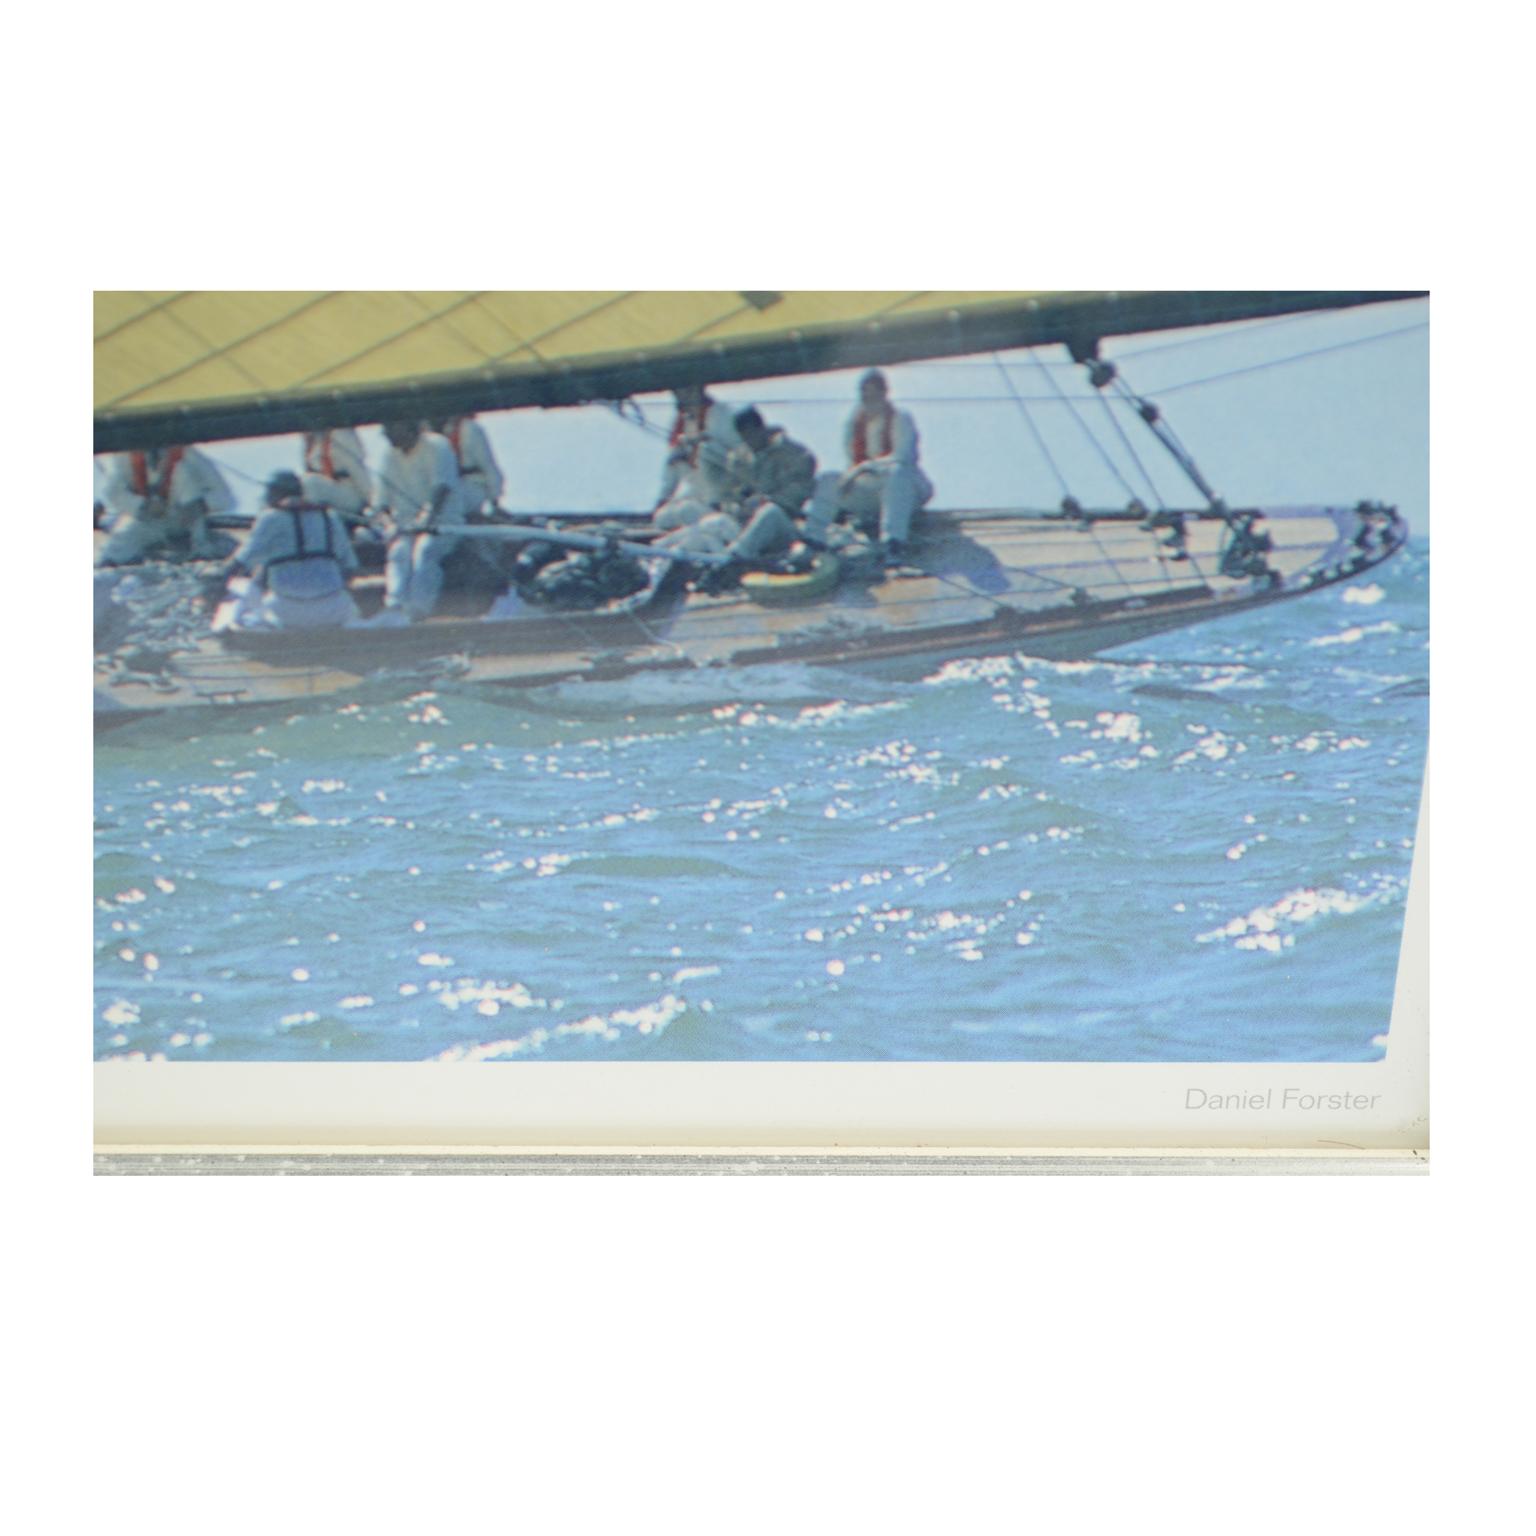 Wood Lithograph with Frame of a Photo by Daniel Forster of 2001 America’s Cup